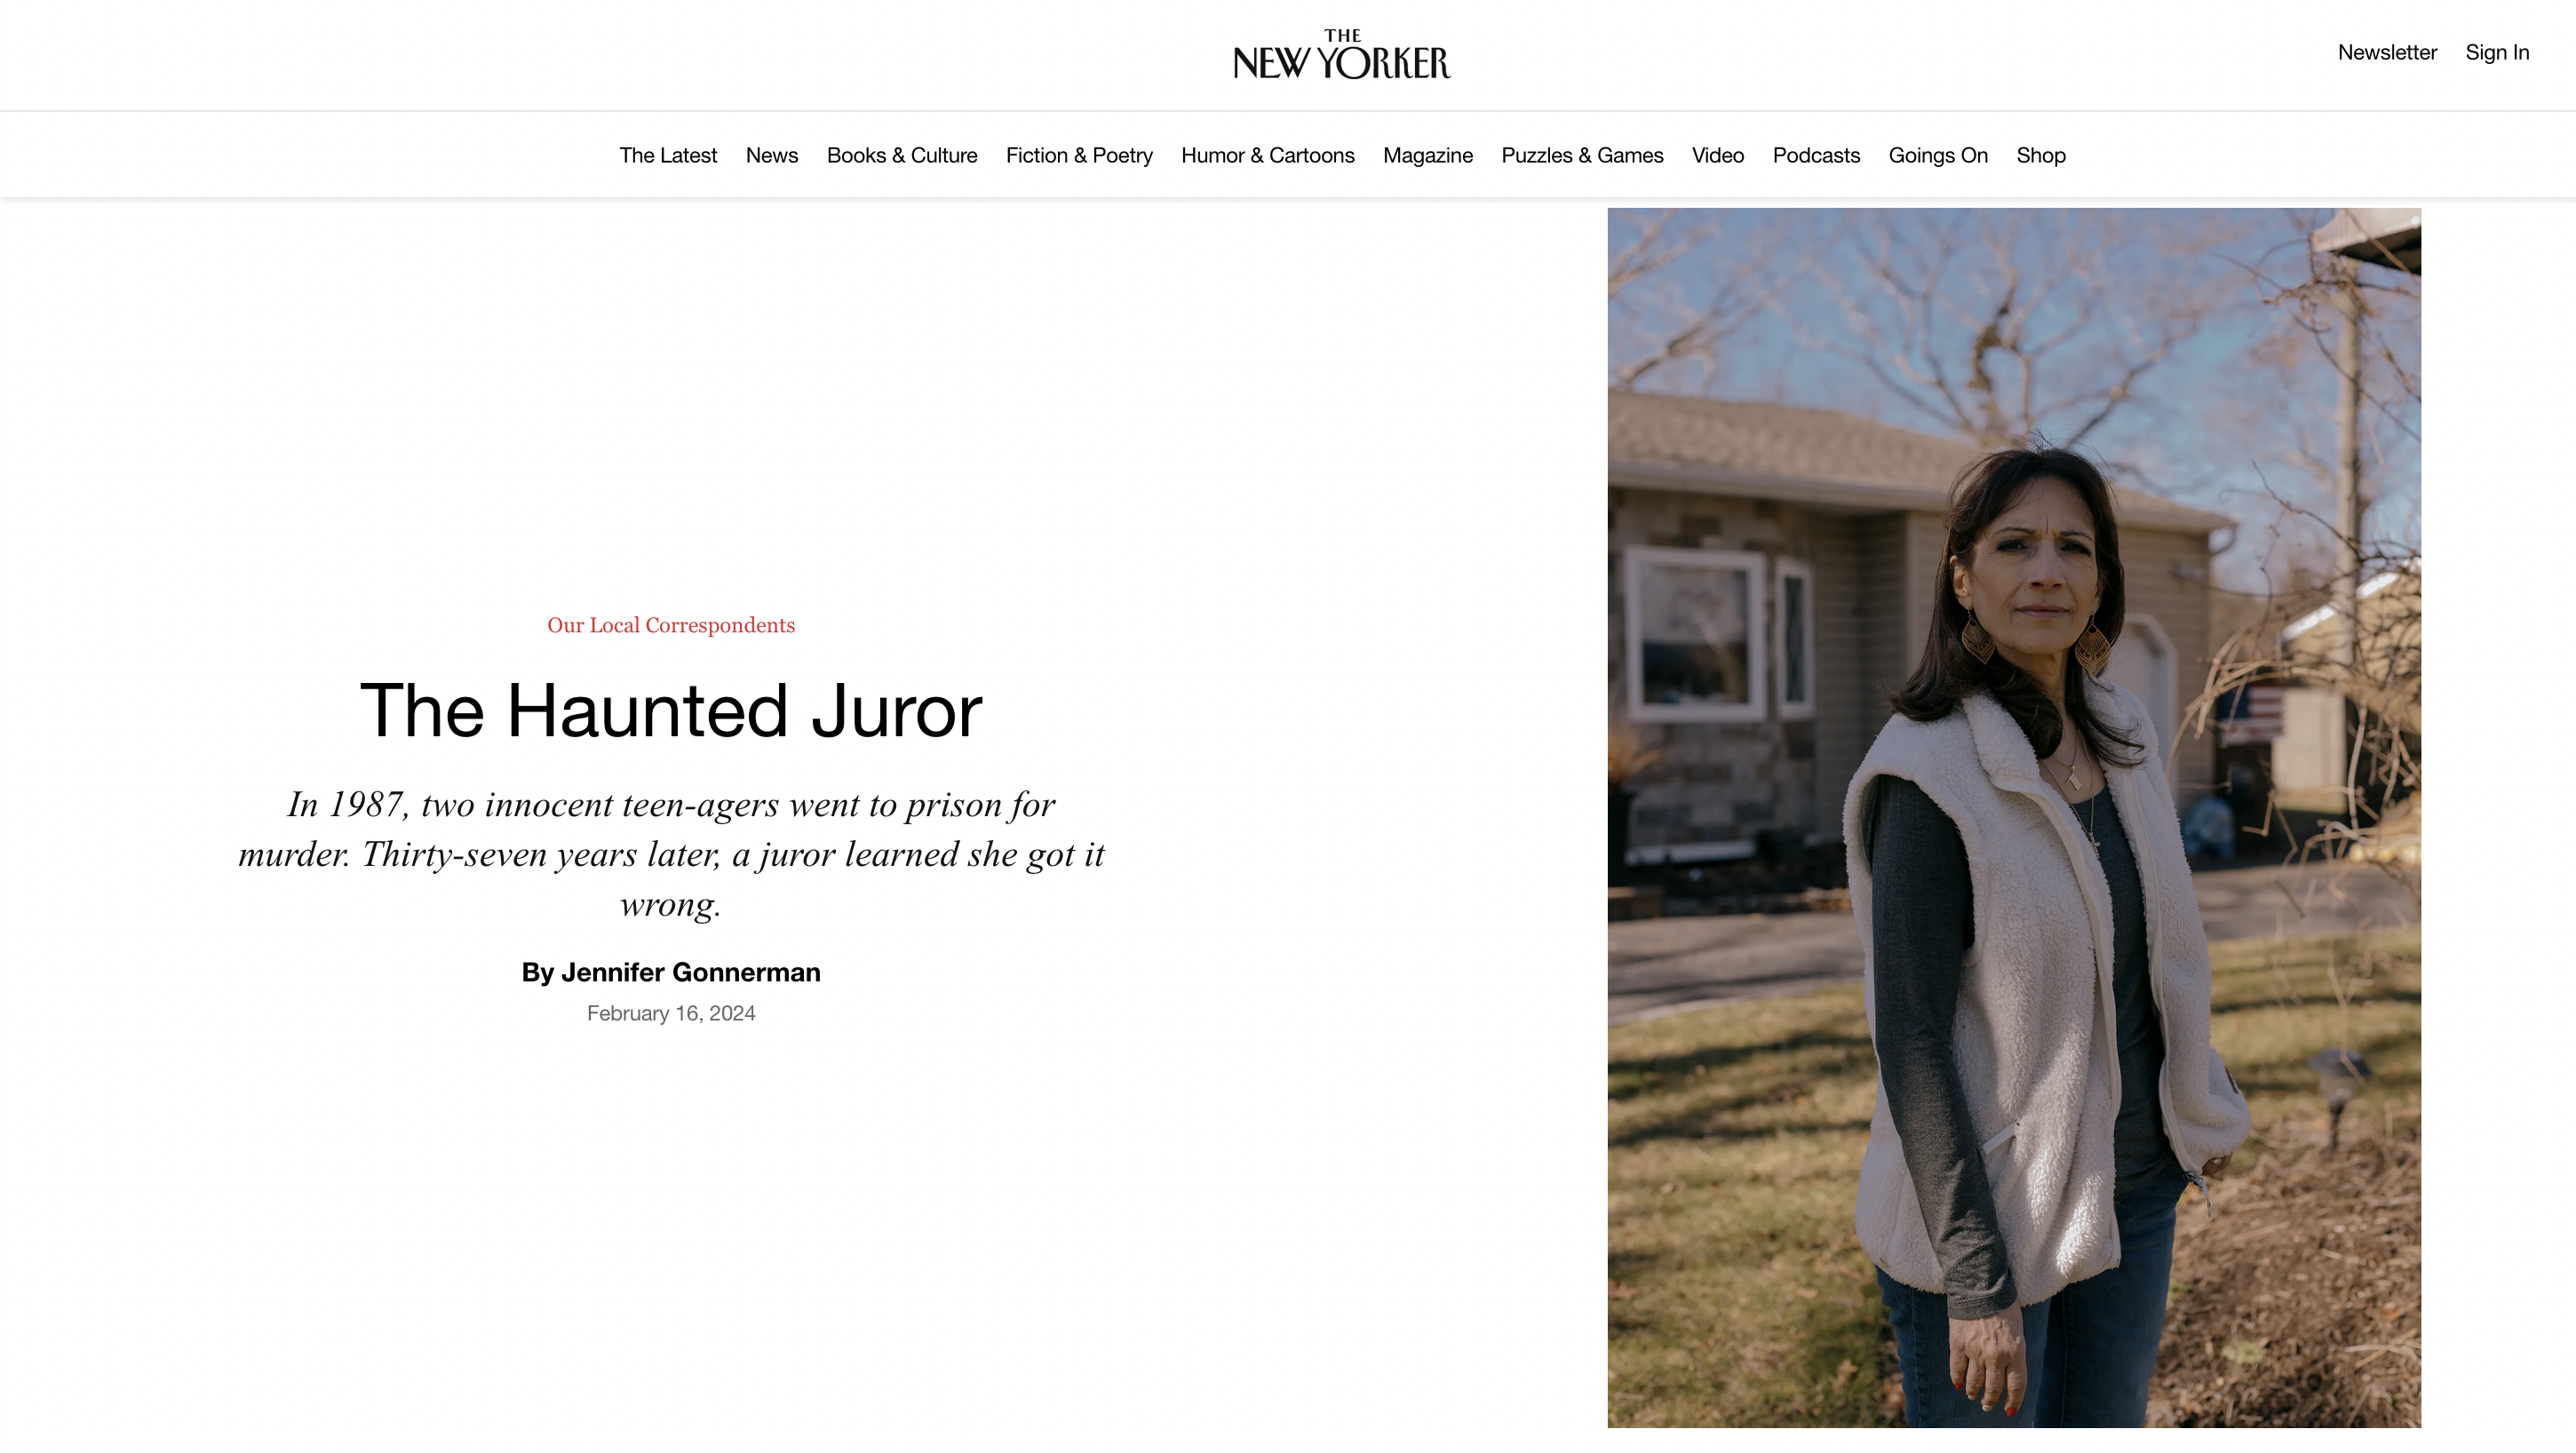 for The New Yorker: The Haunted Juror